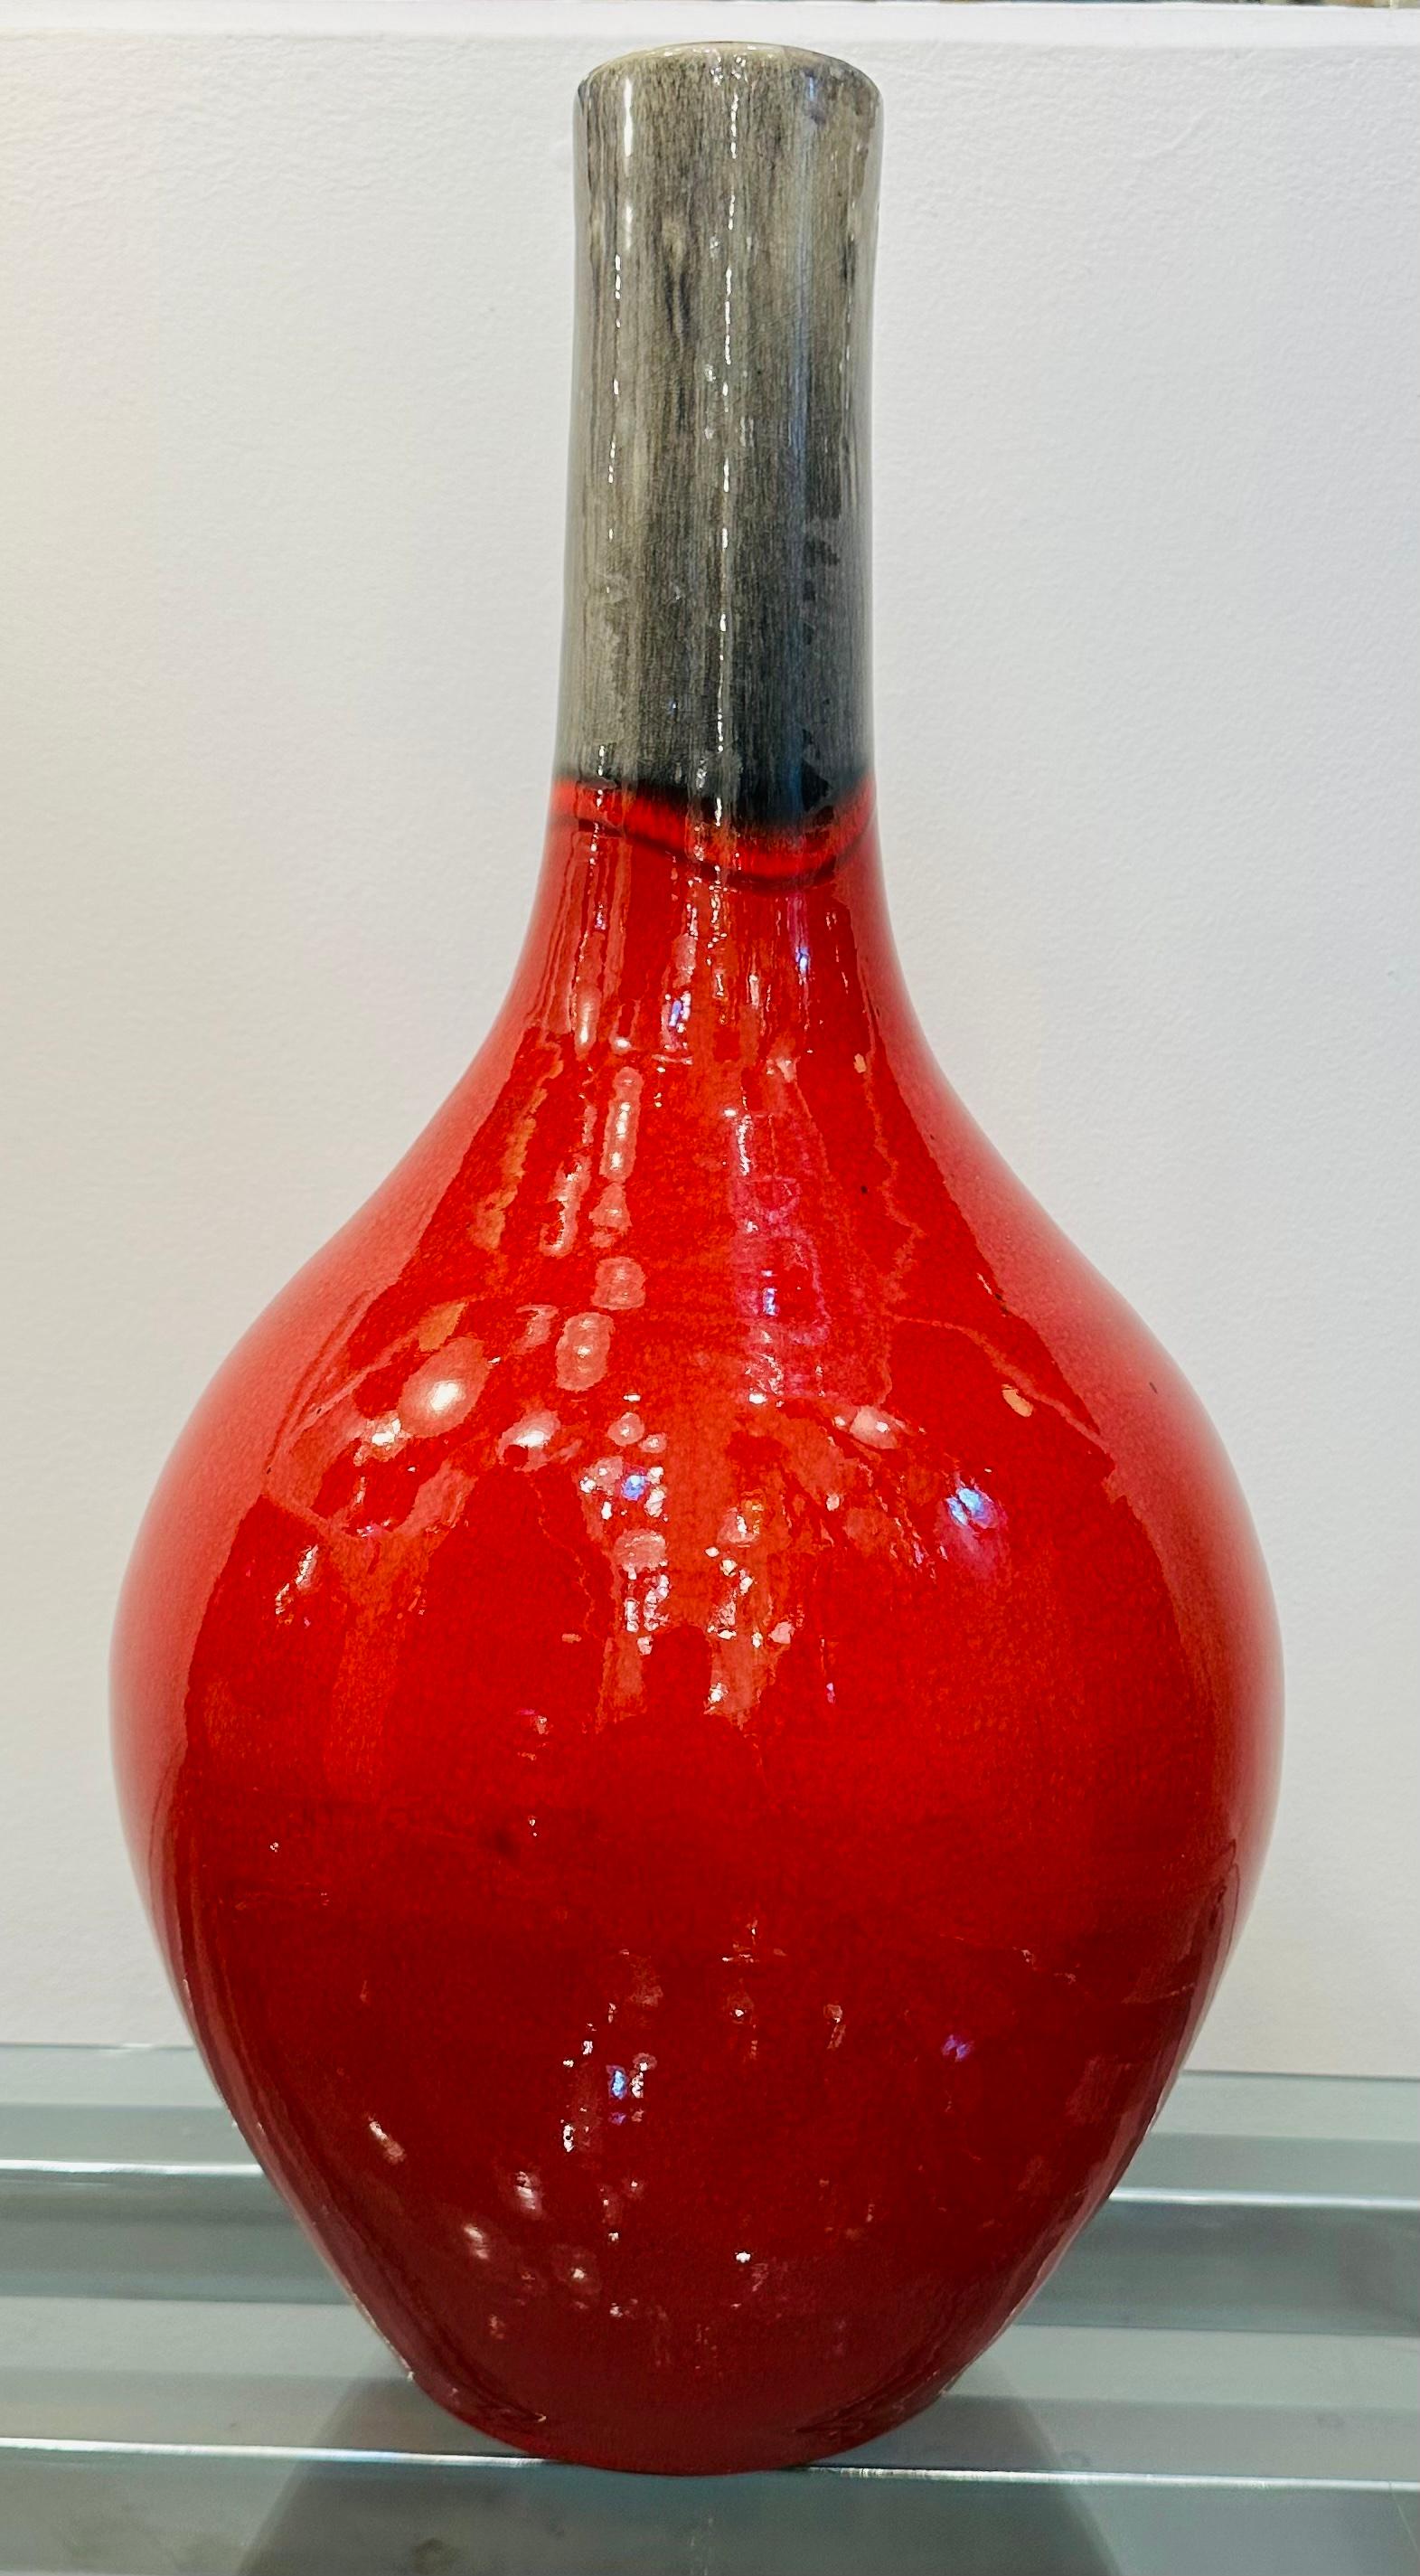  A large 1970s mottled red and grey ceramic glazed vase.  The bulbous body of an intense mottled red with a wonderful shimmering glaze narrows towards the neck where the colour turns to a molten grey of varying shades.  The vase is unmarked on the